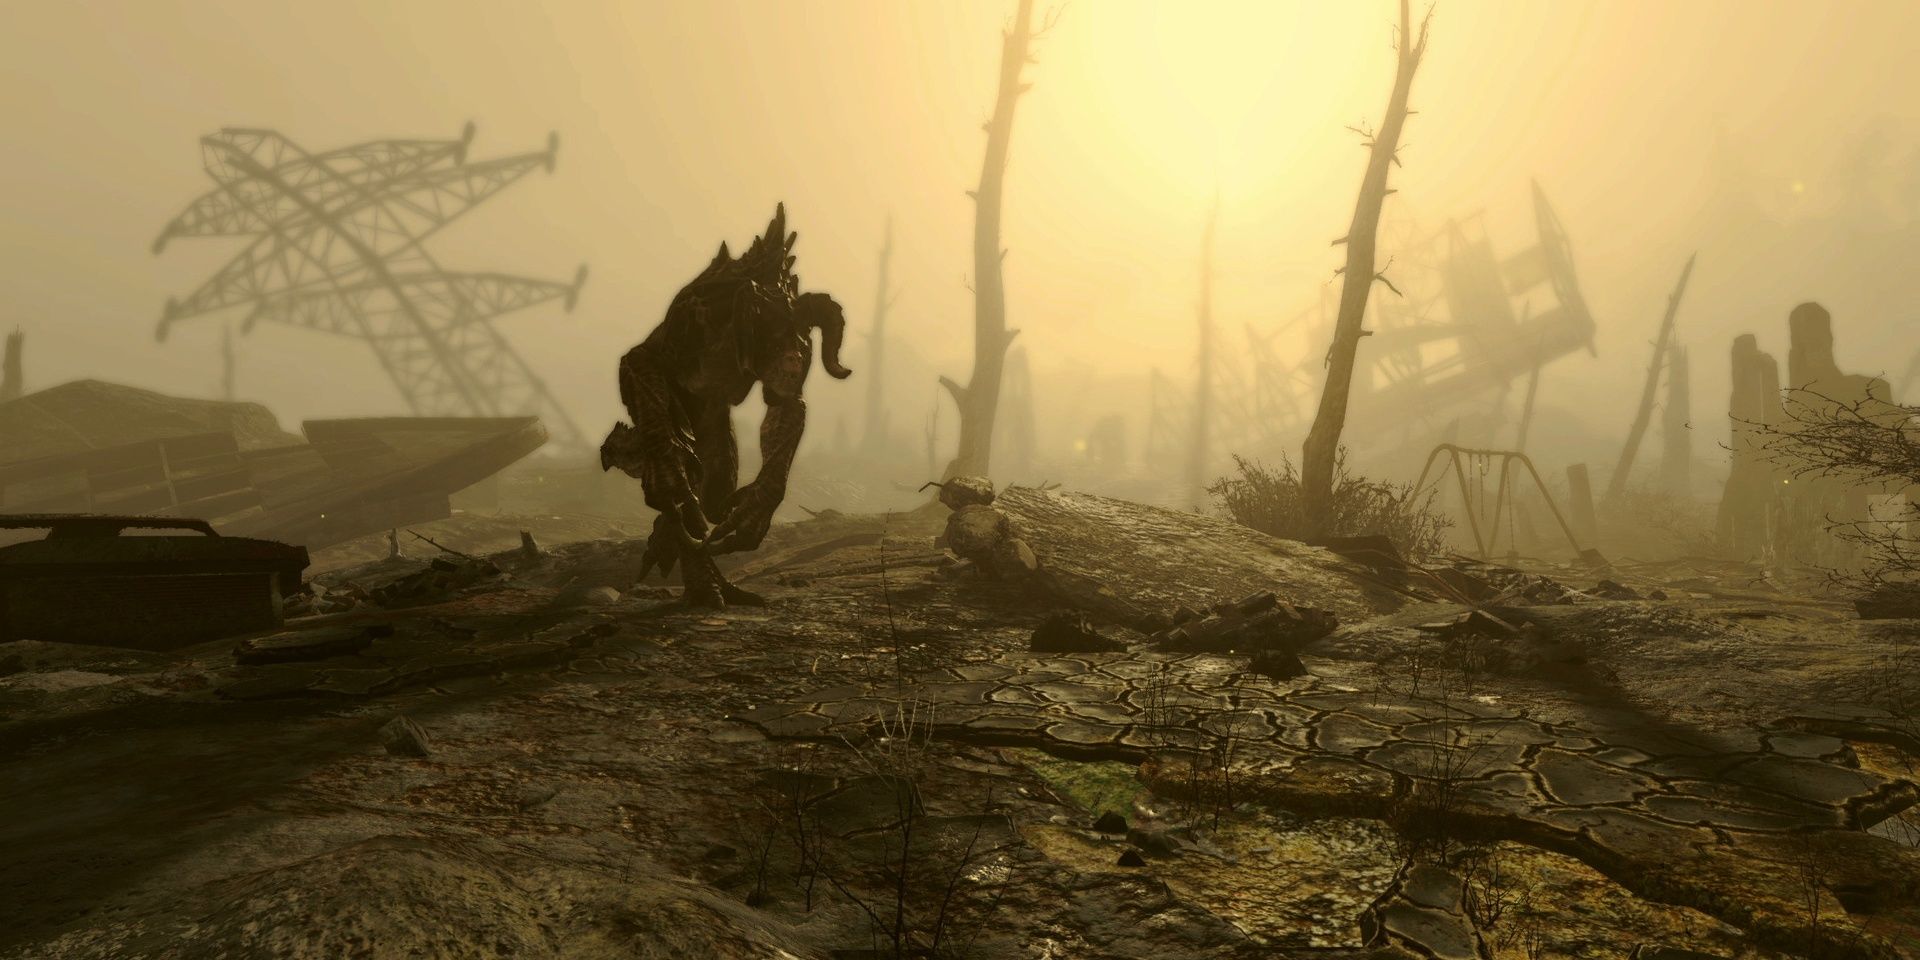 Deathclaw wandering the wasteland in Fallout 4